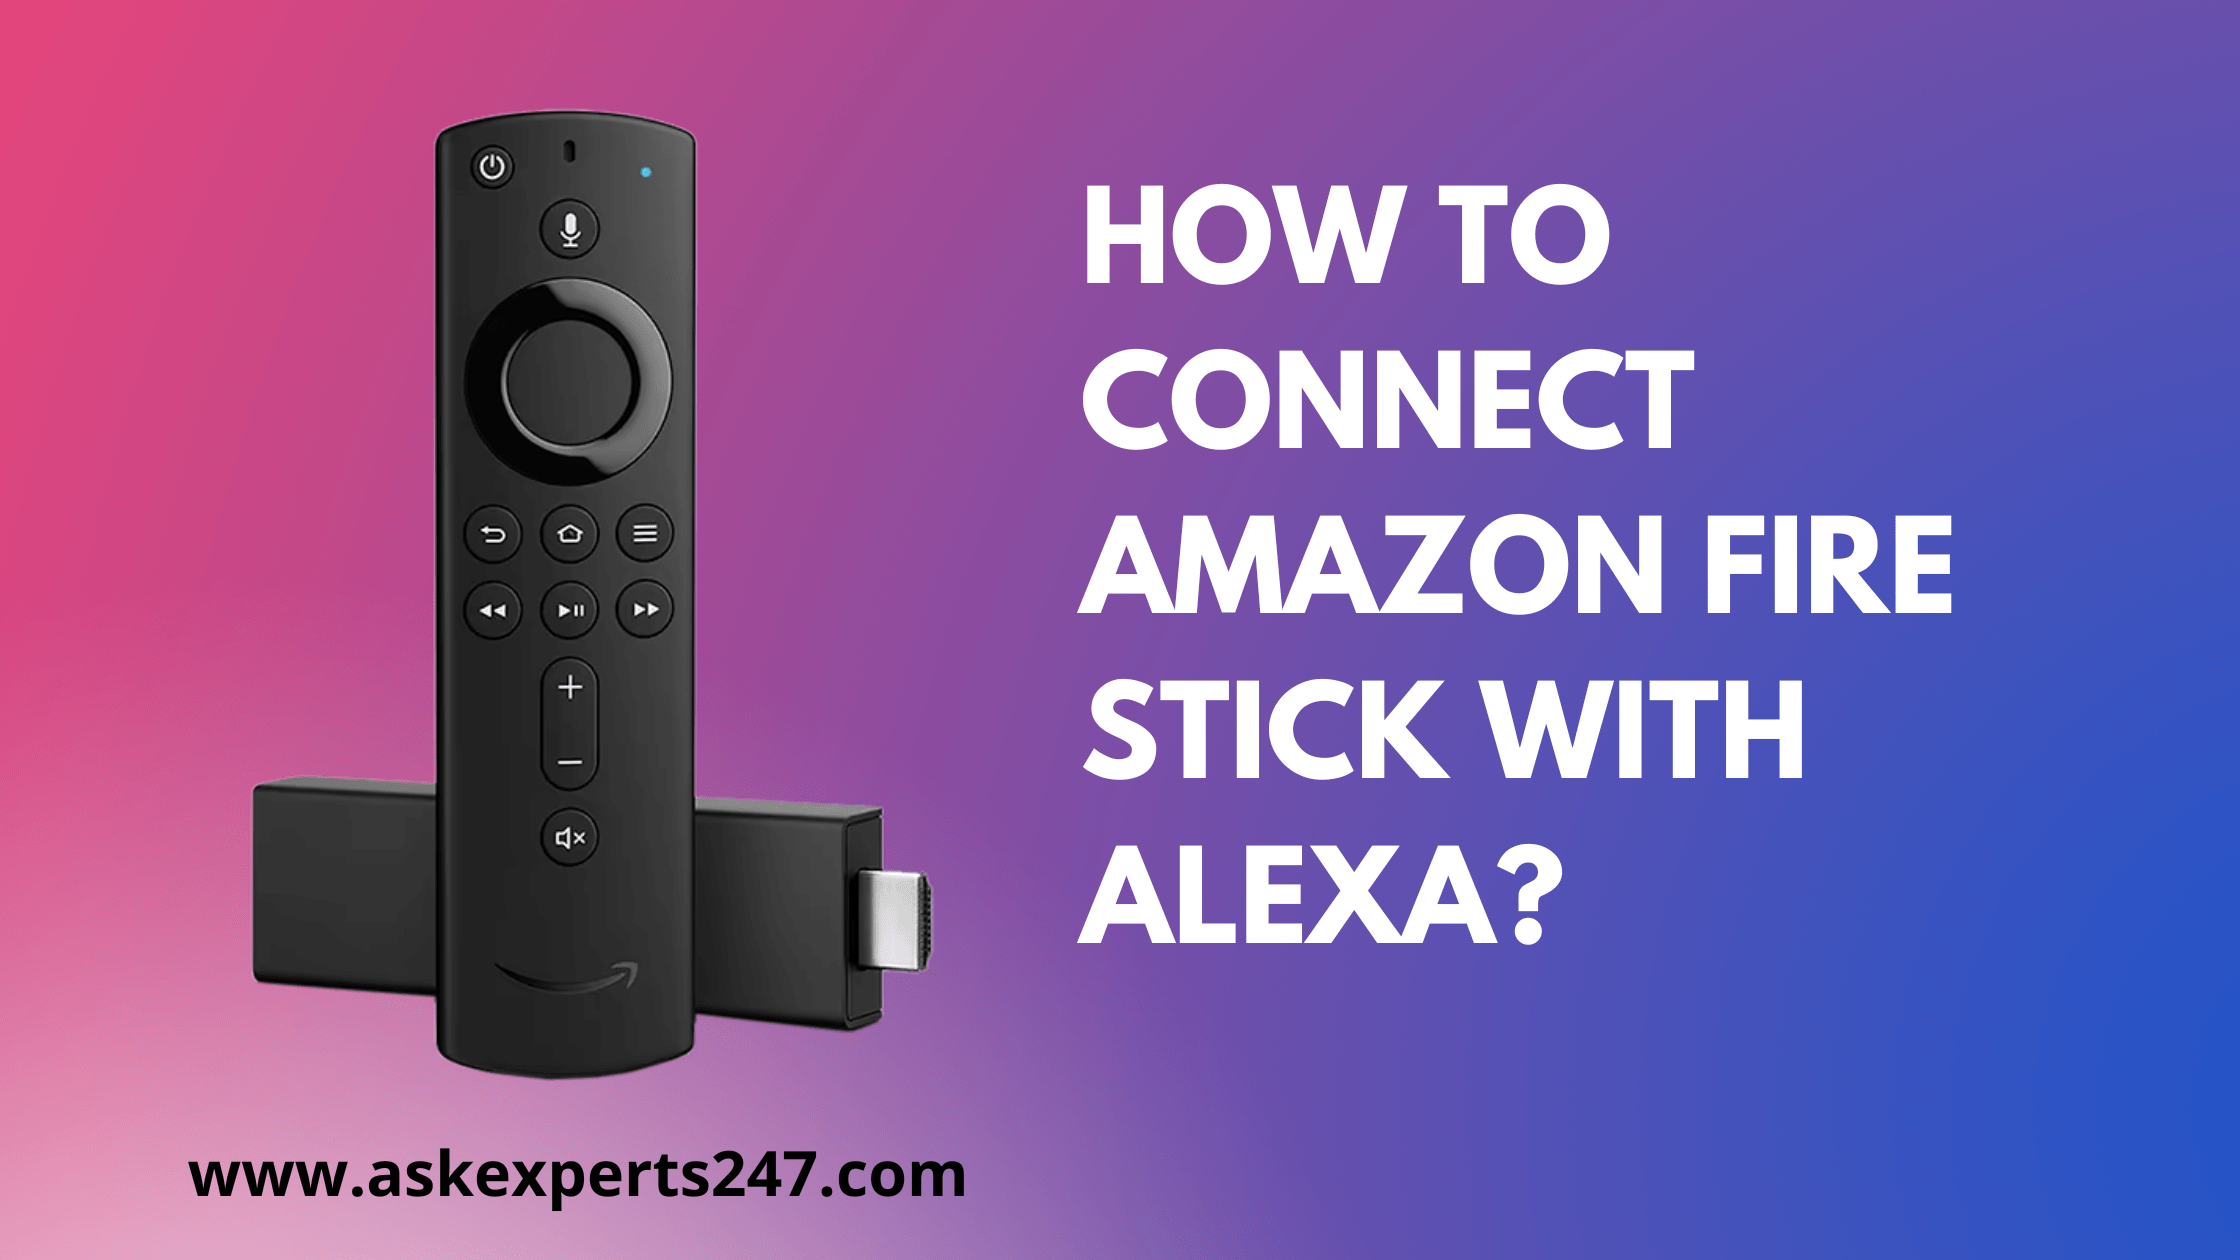 How to Connect Amazon Fire Stick with Alexa